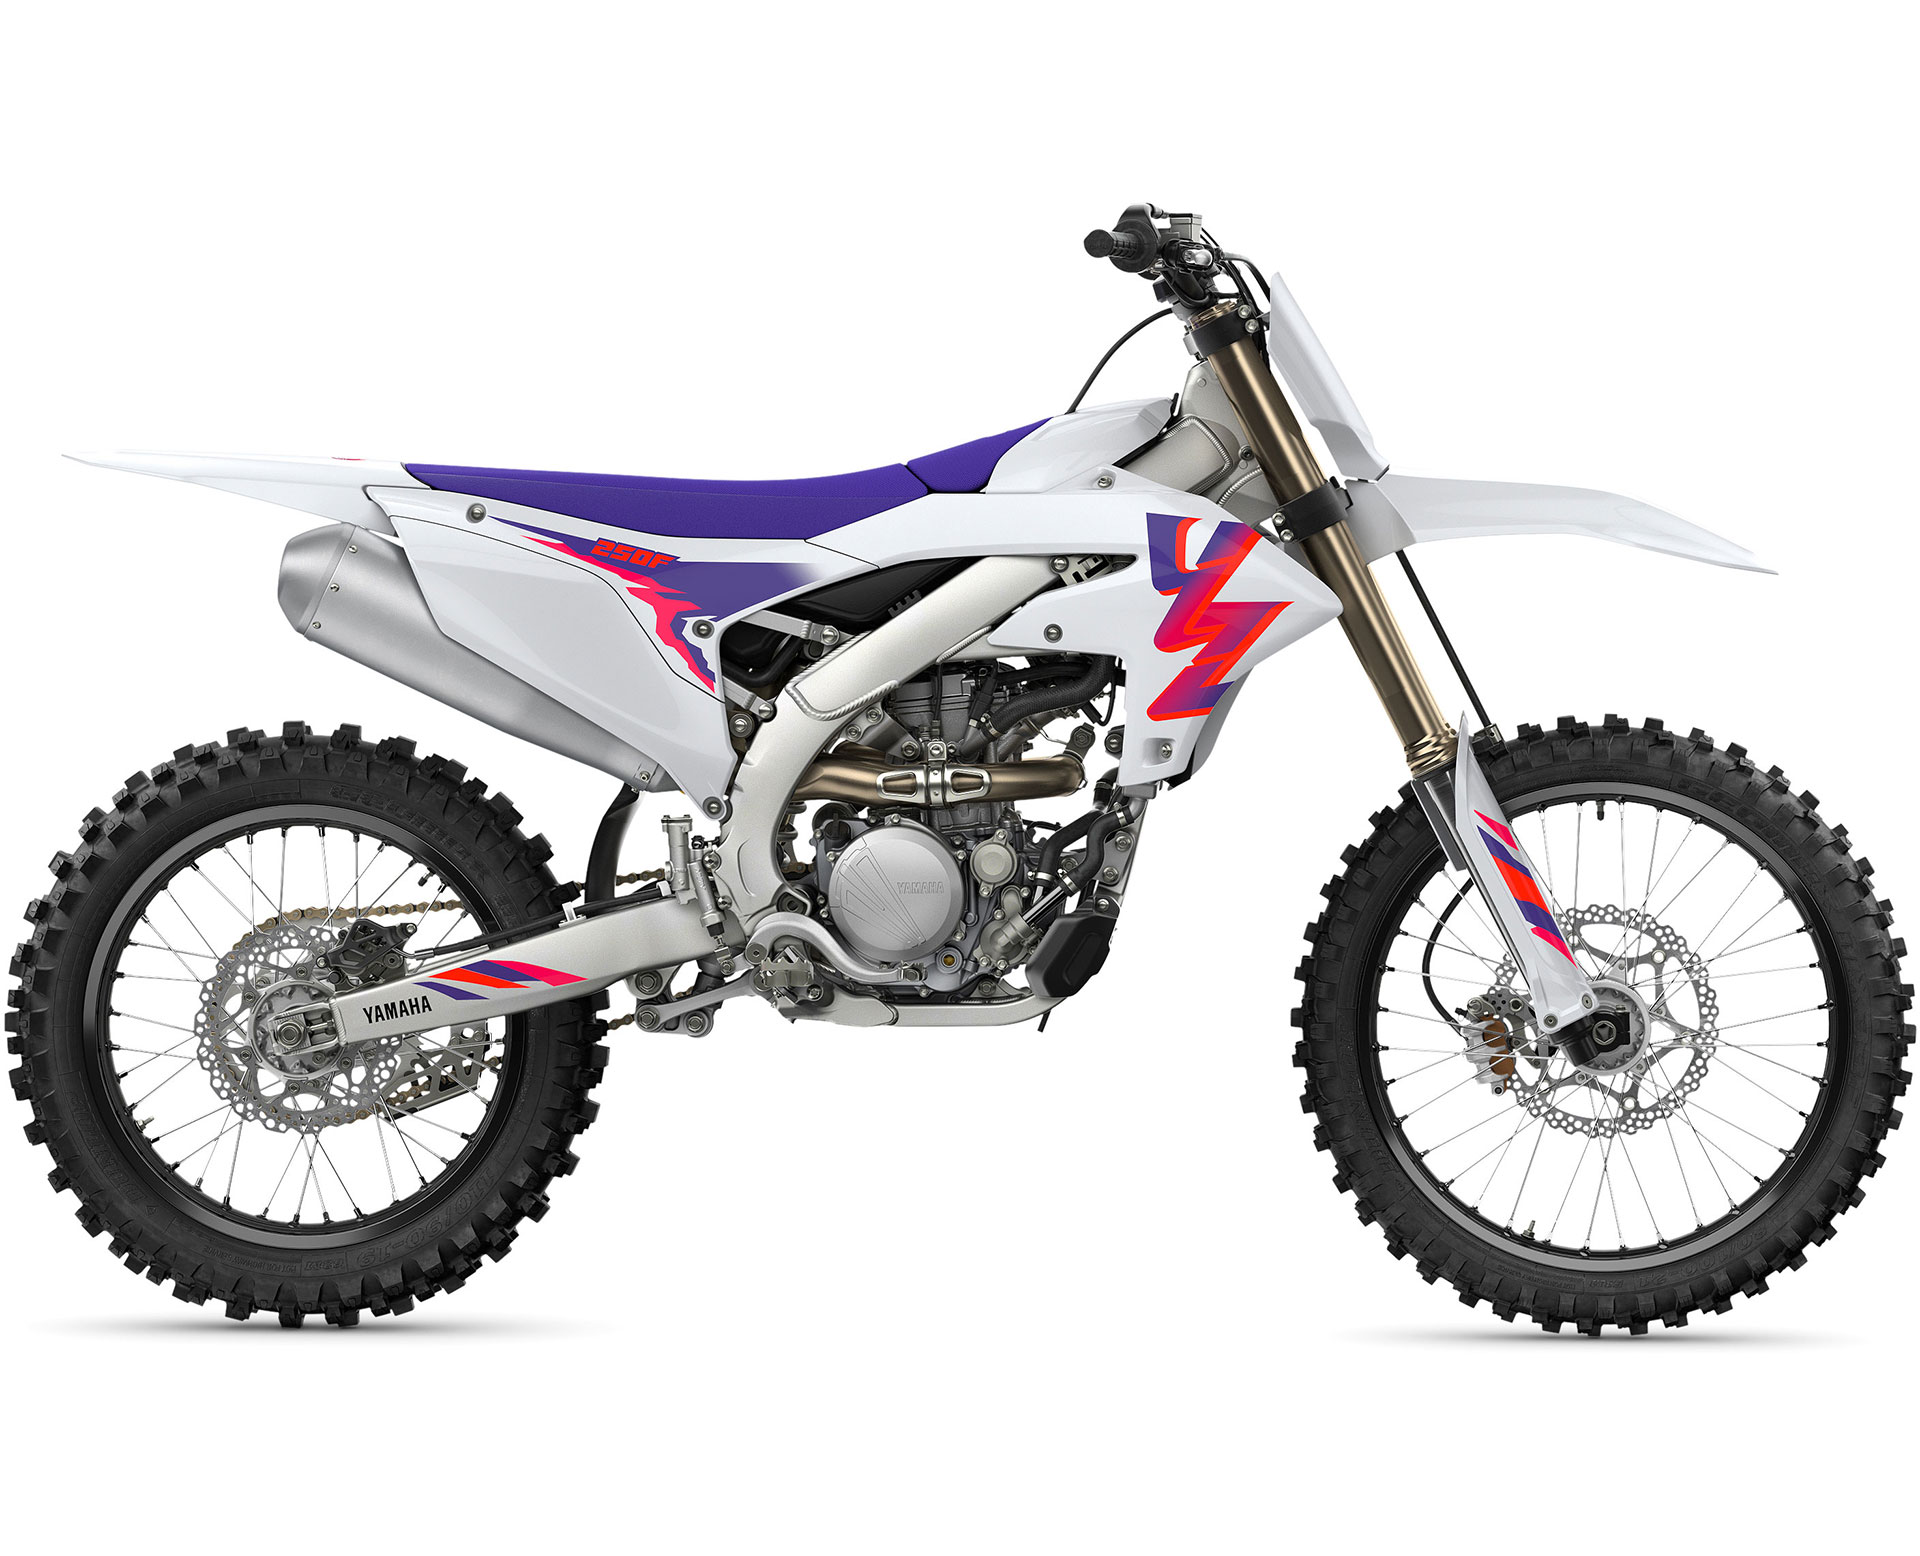 Thumbnail of your customized 2024 YZ250F